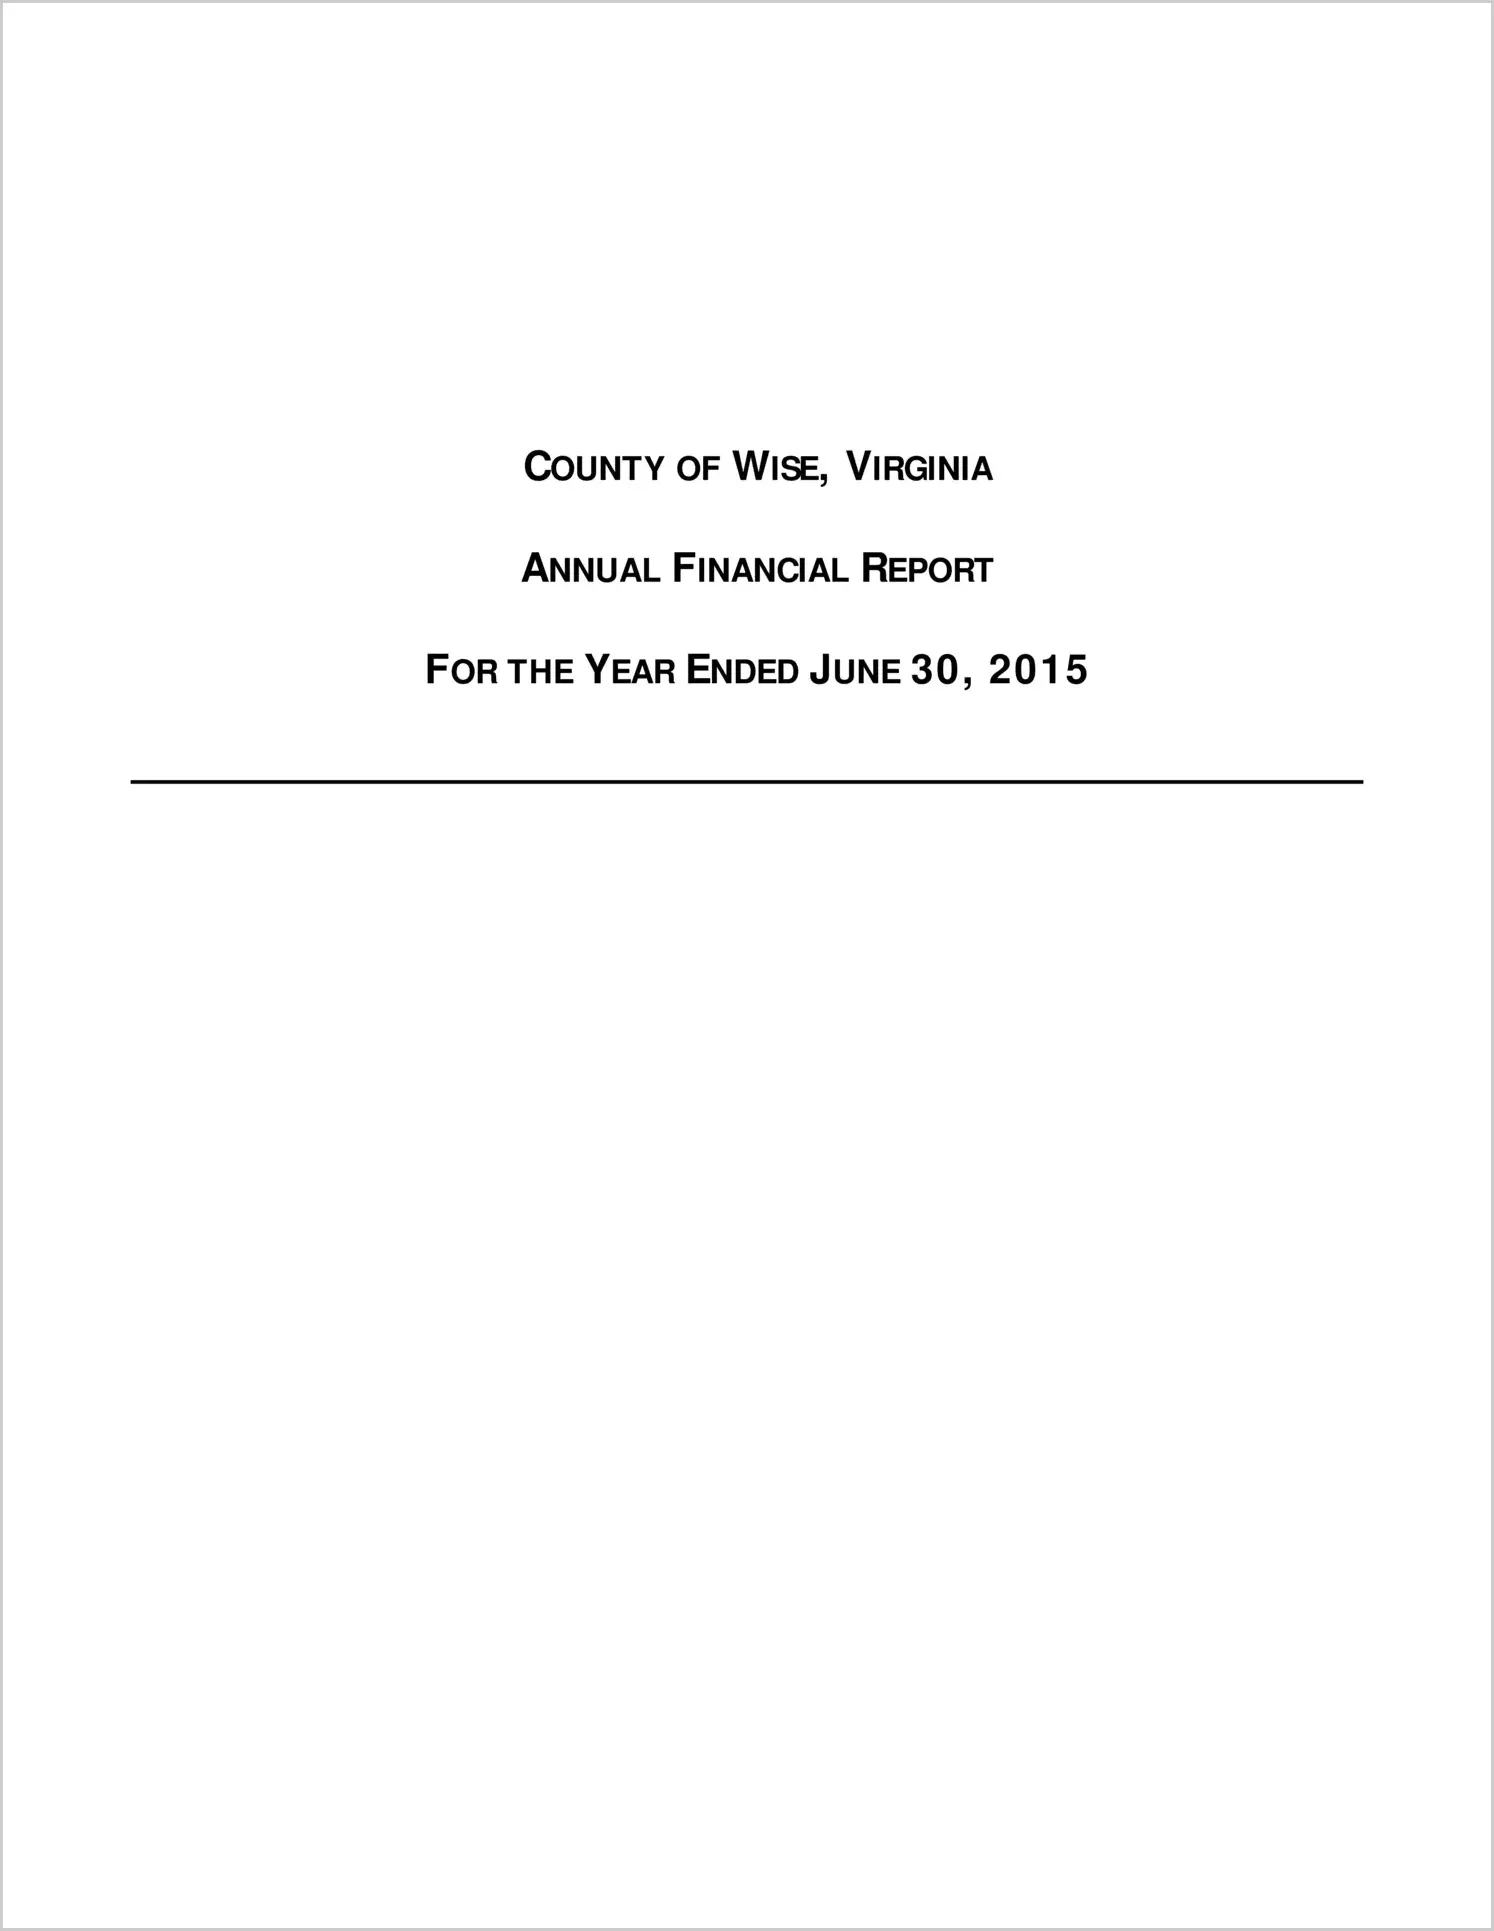 2015 Annual Financial Report for County of Wise